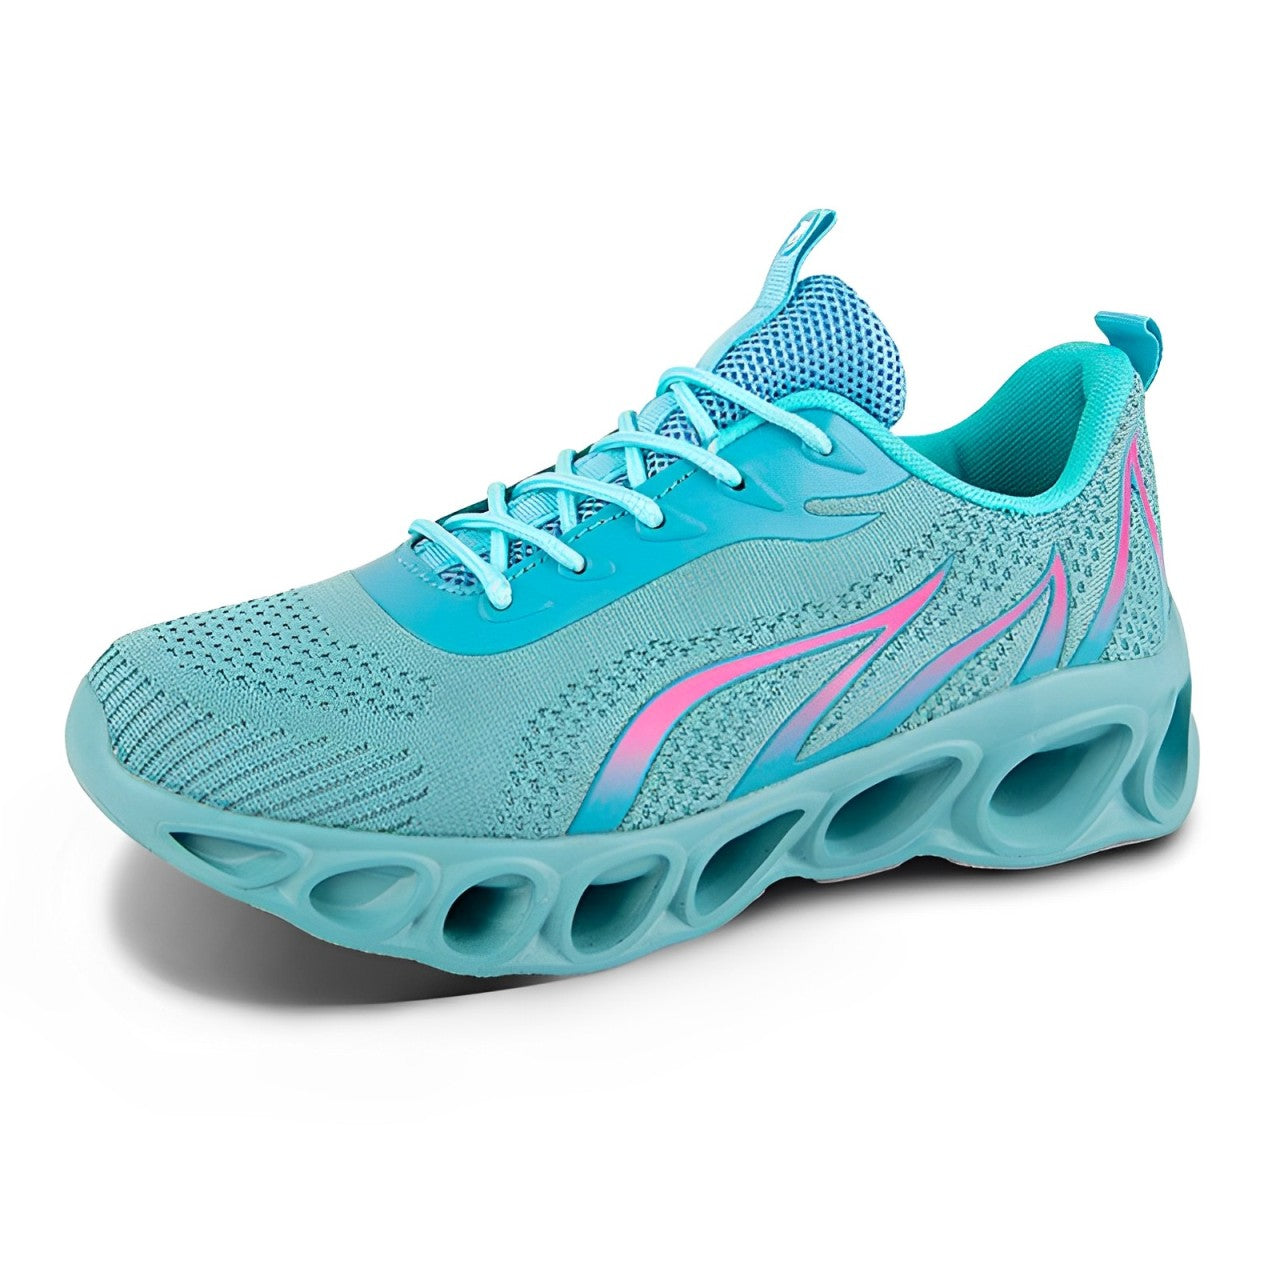 Groovywish Orthopedic Comfortable Walking Running Shoes | Women Standing All Day Shoes